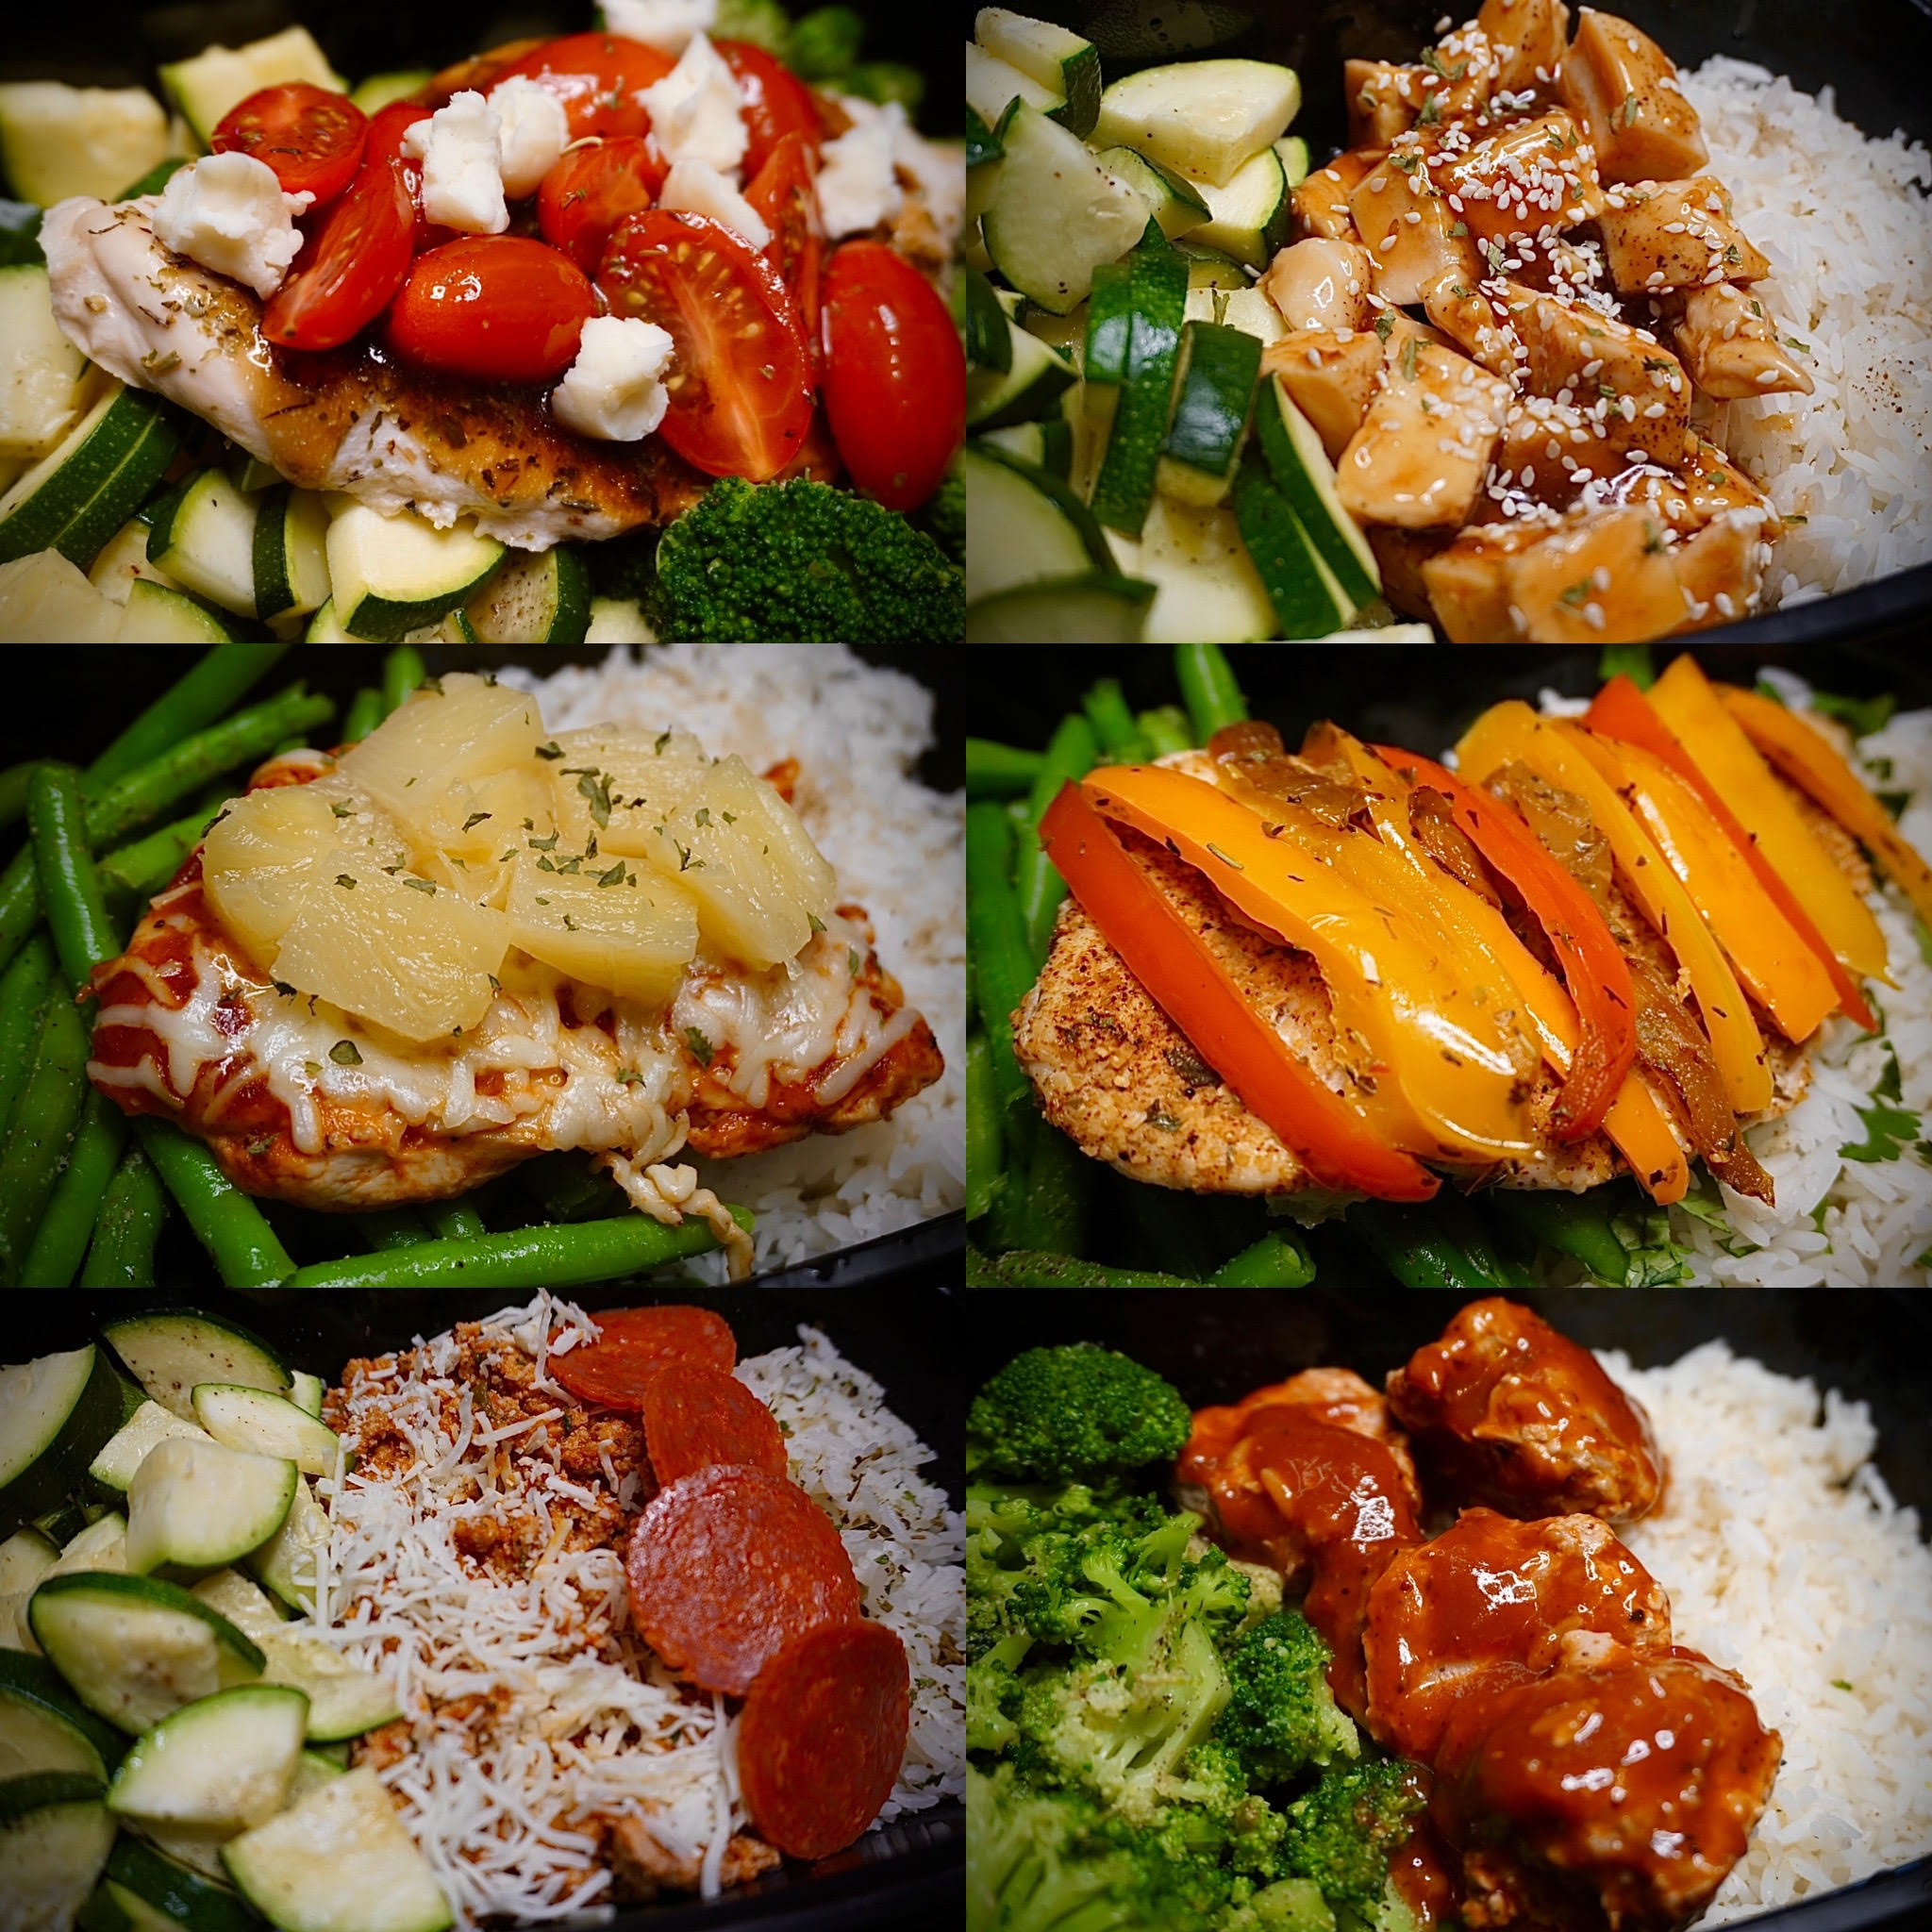 Nutri-Meals Options – Choose Your Own Carbs – Healthy, Prepared